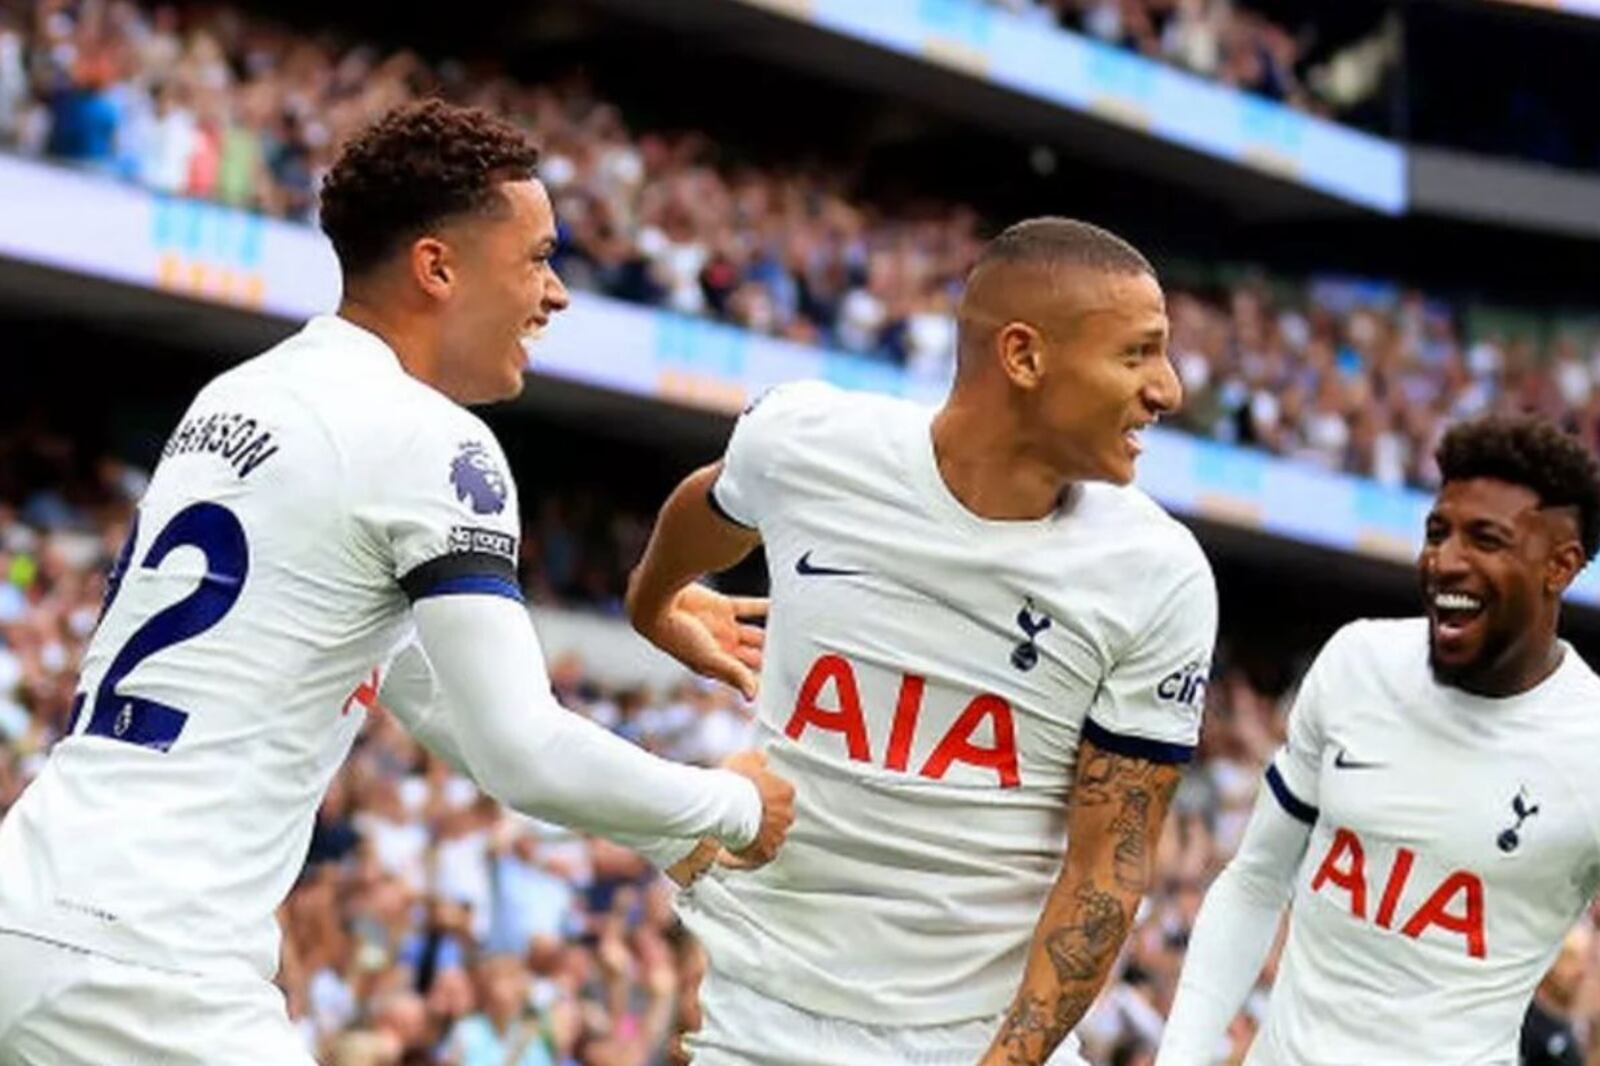 Tottenham vs Fulham Premier League: where to watch this game LIVE from the US